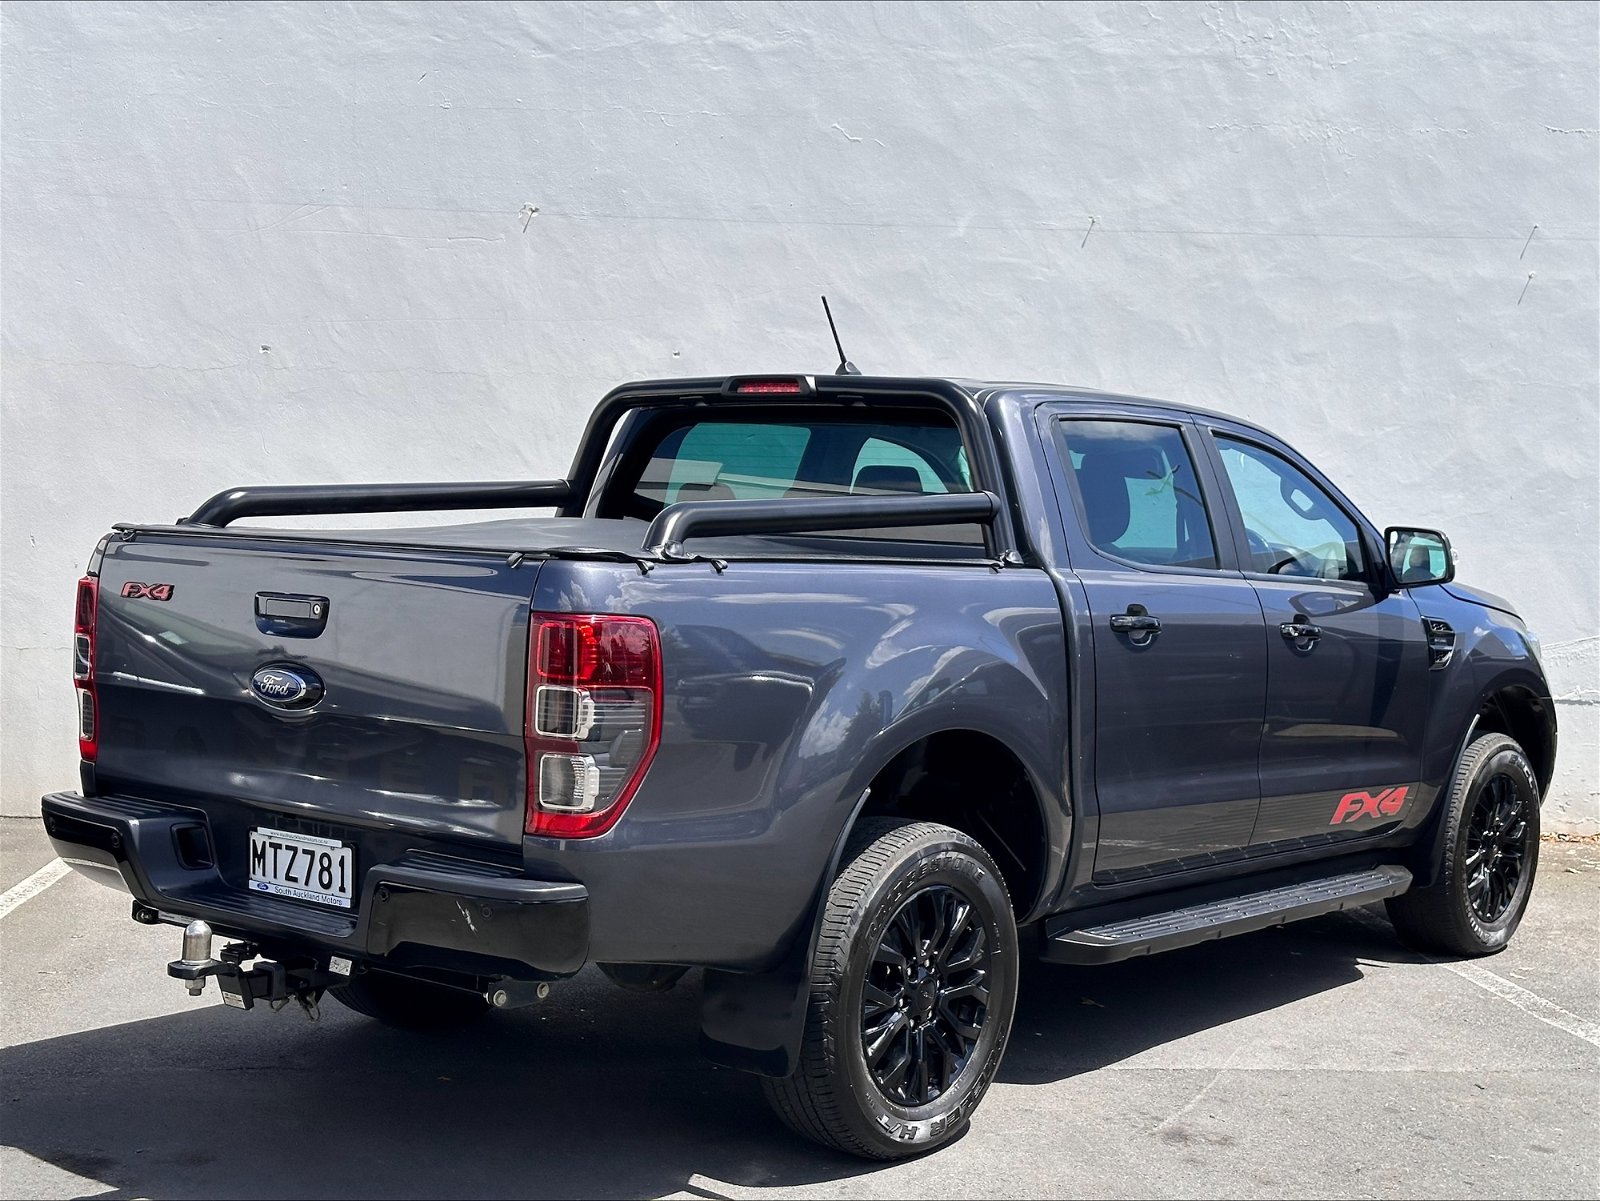 2020 Ford Ranger FX4 4x2 Double Cab